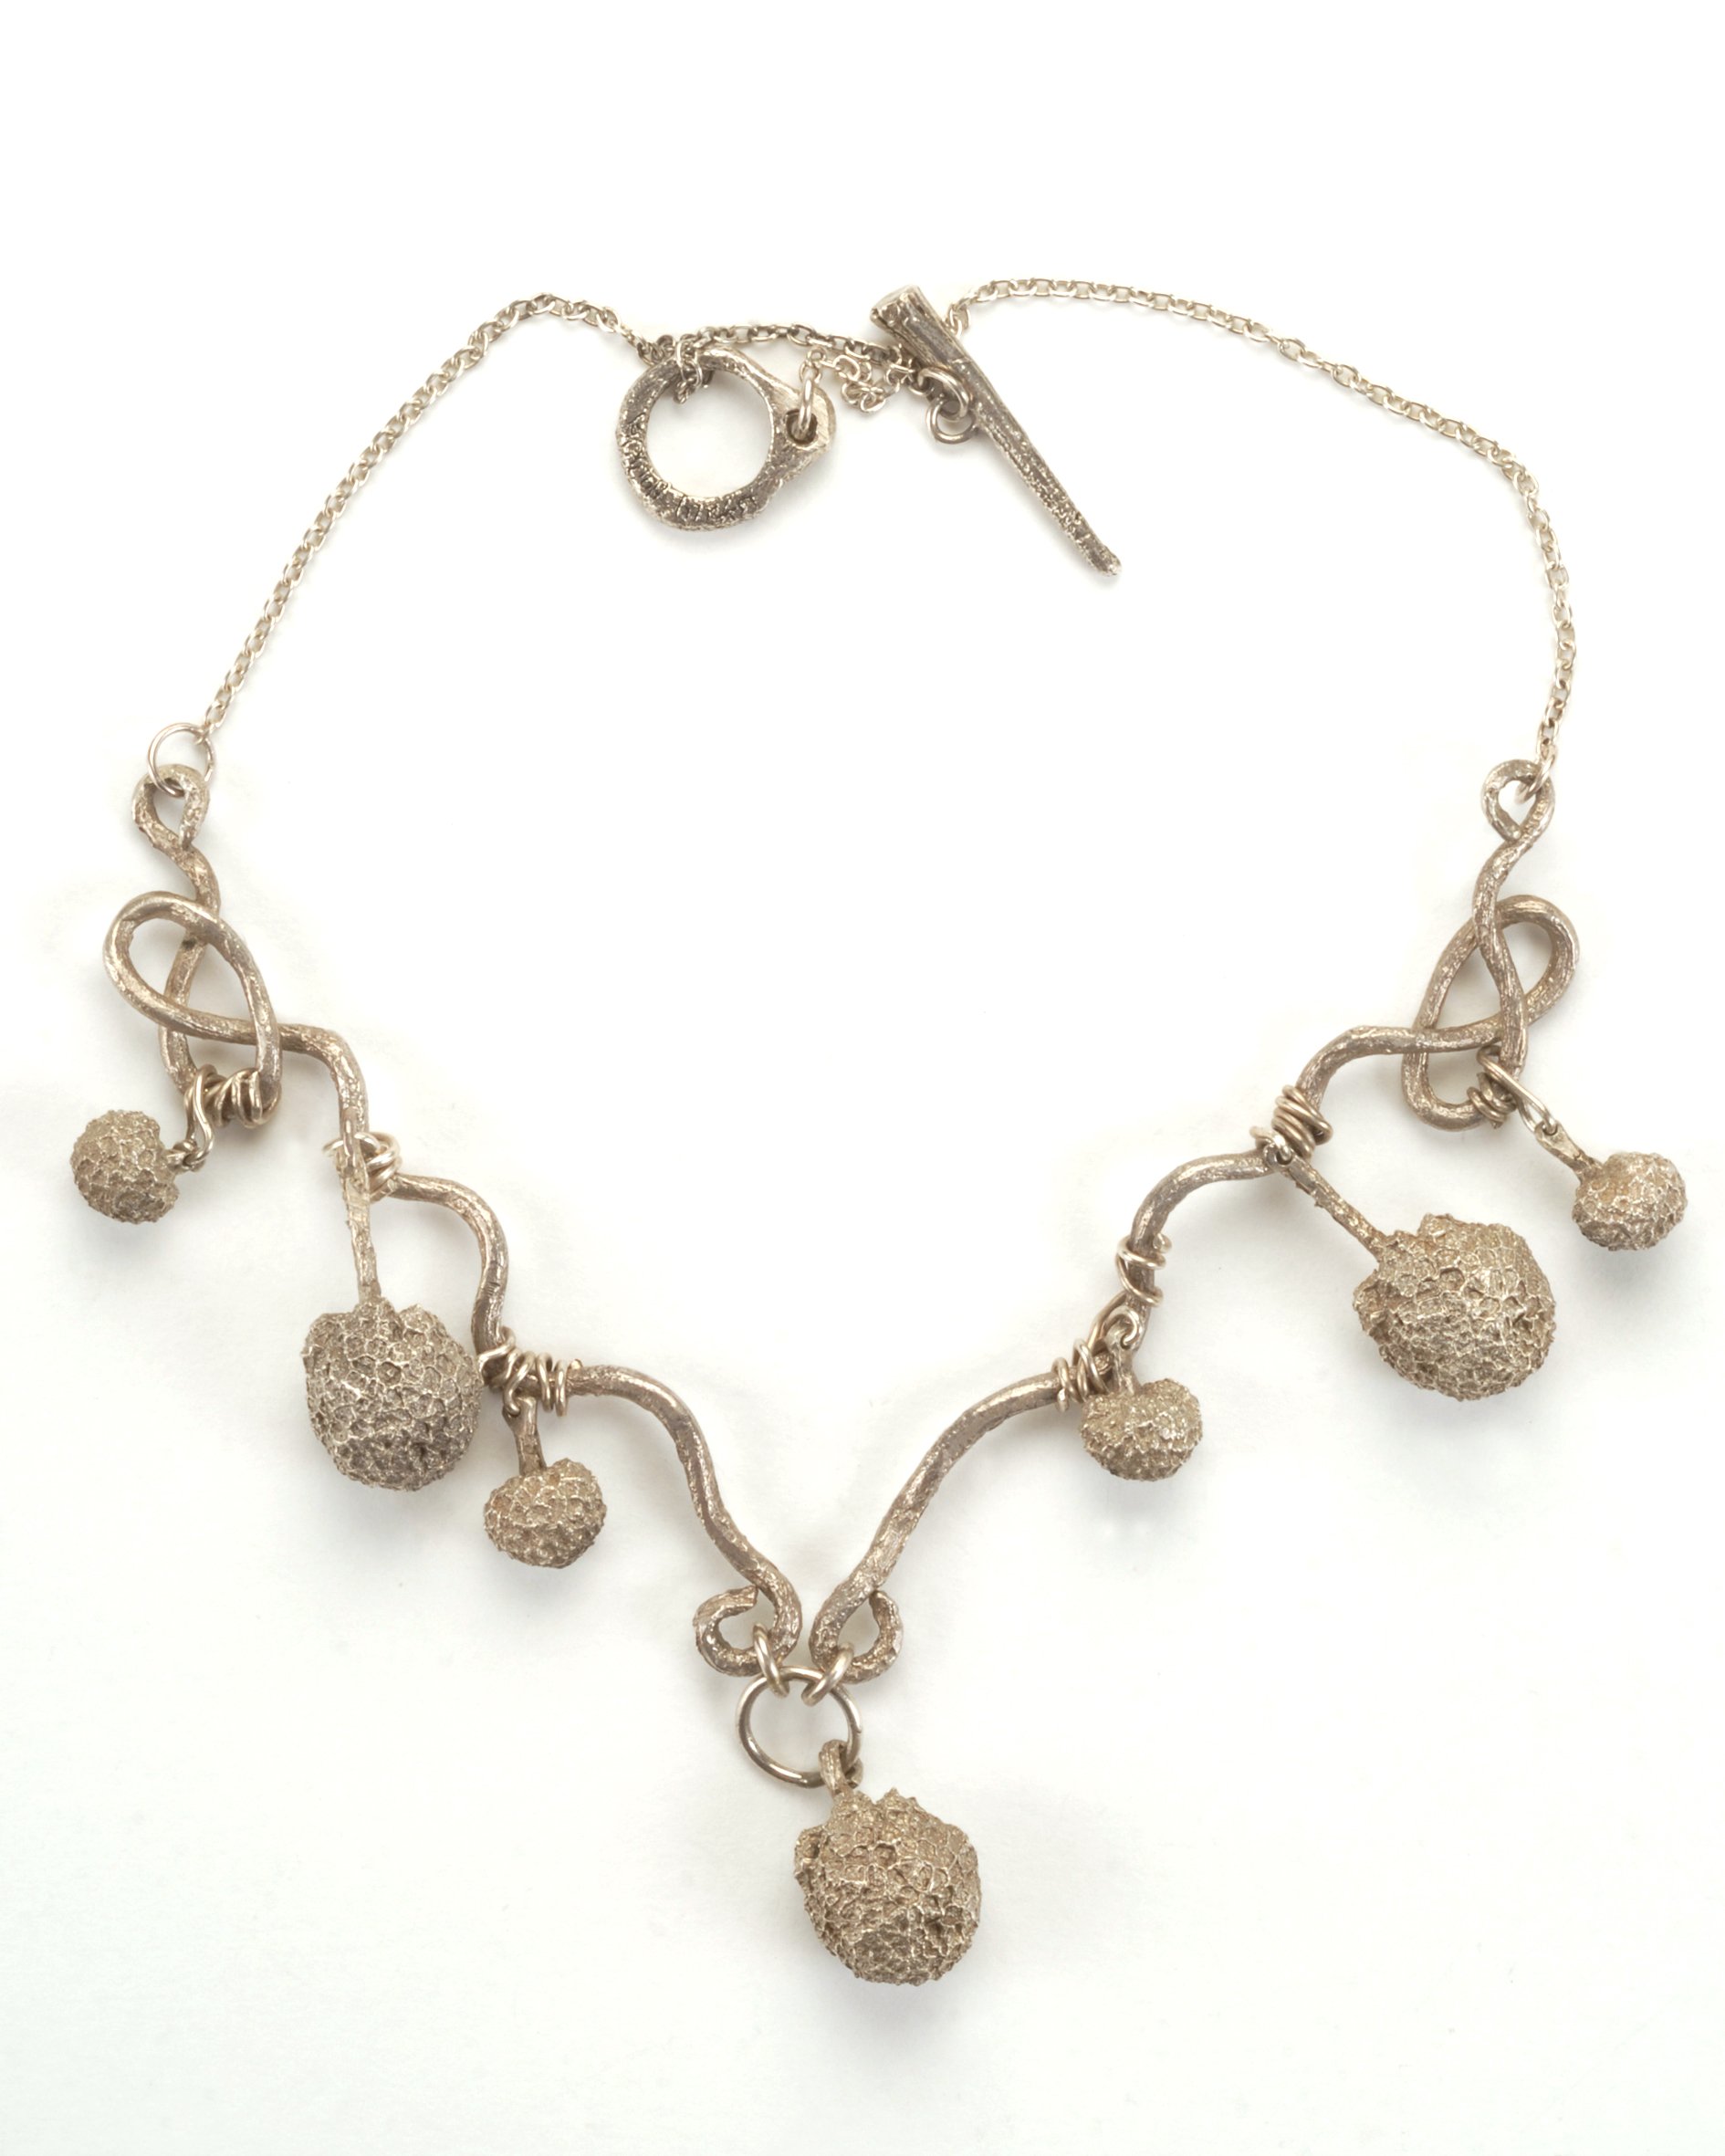 Sycamore pod necklace- Sterling